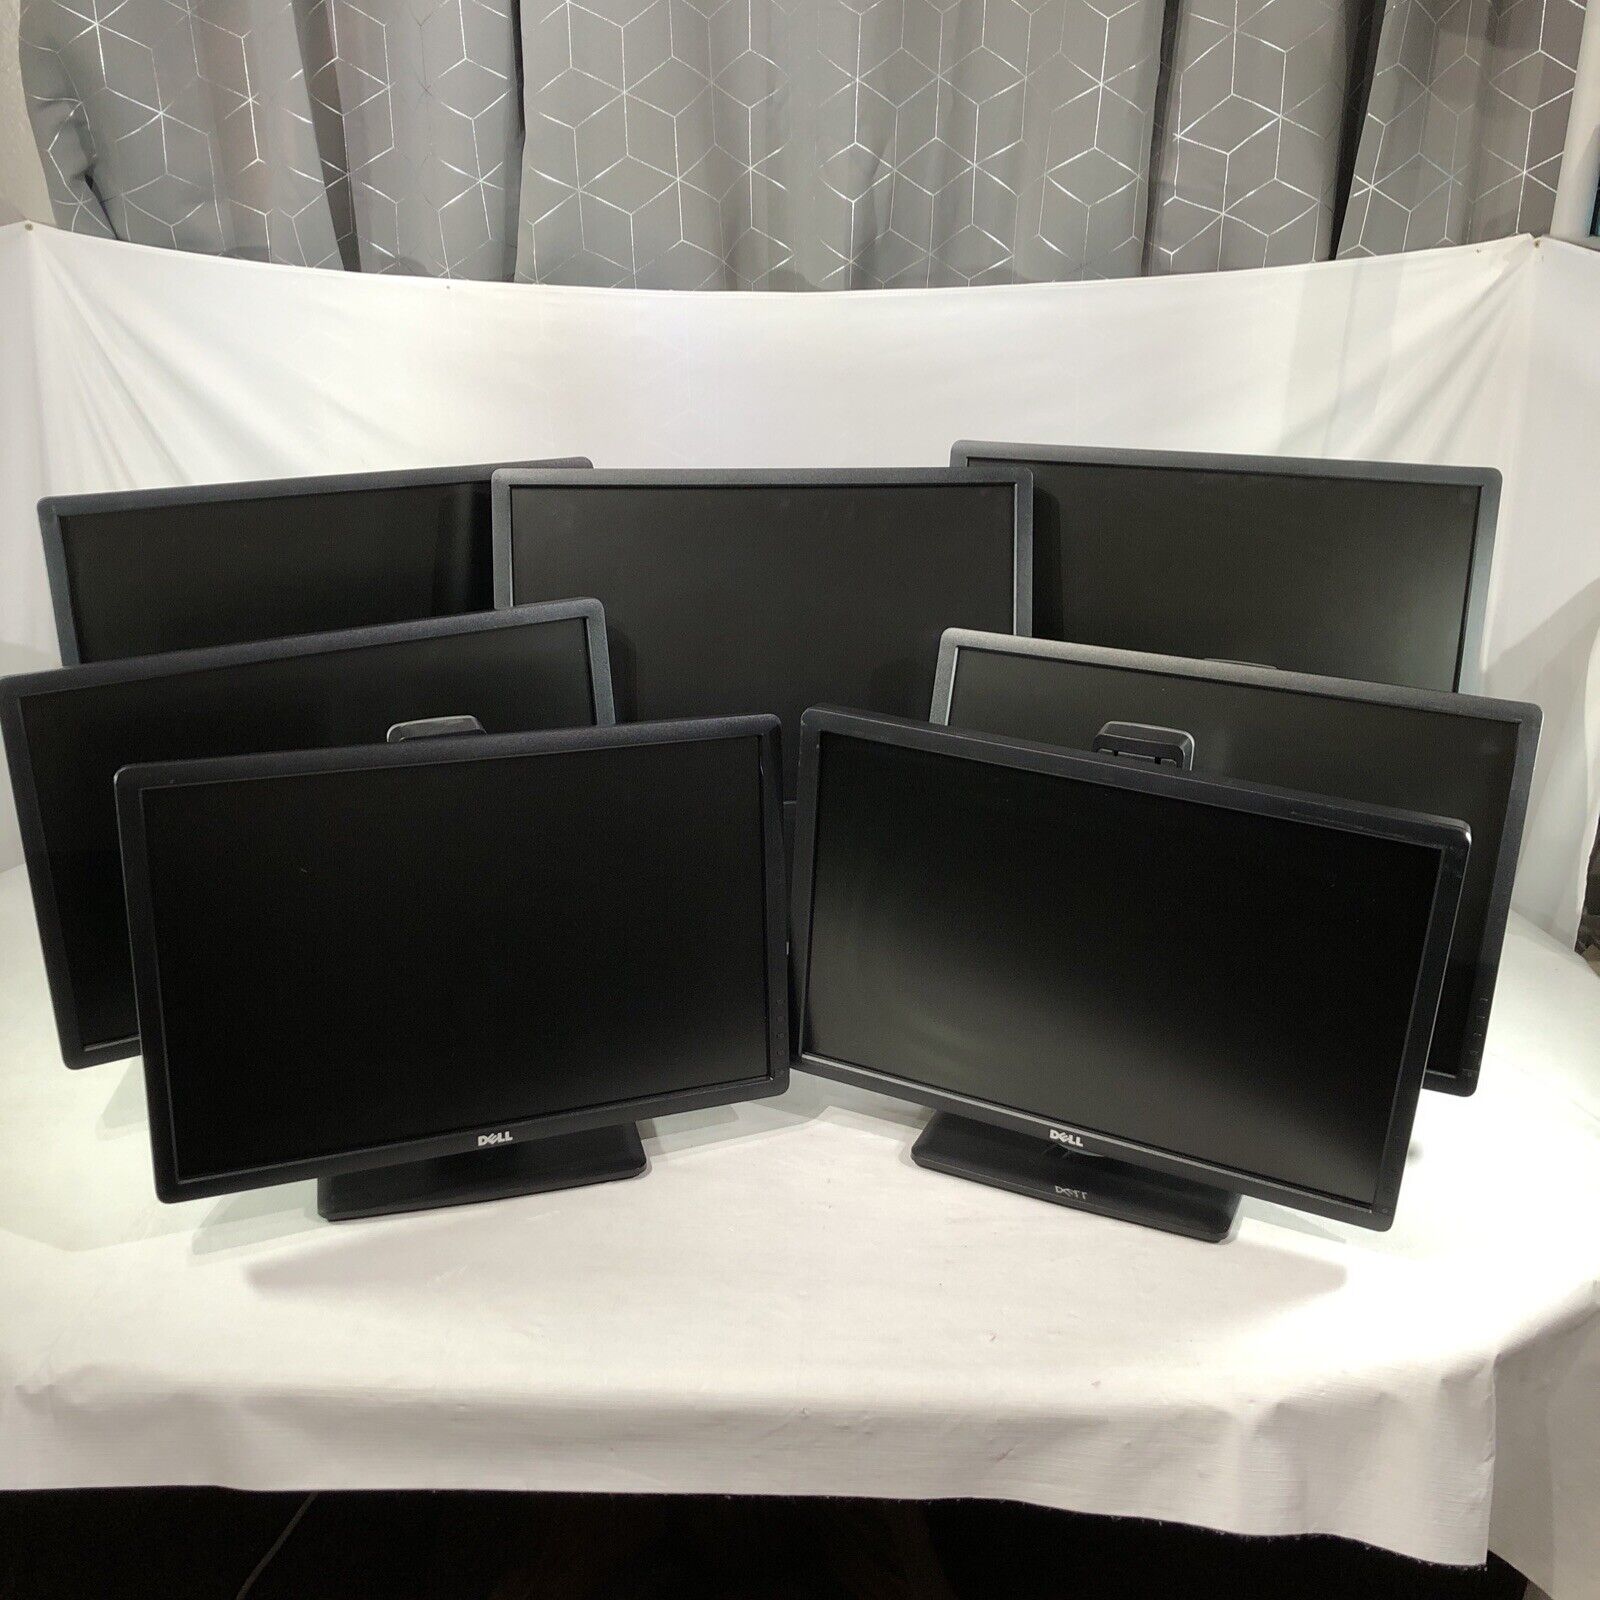 [LOT of 7] Dell P2213 LCD Monitor, Office/Desktop, W/ Stands, TESTED and working